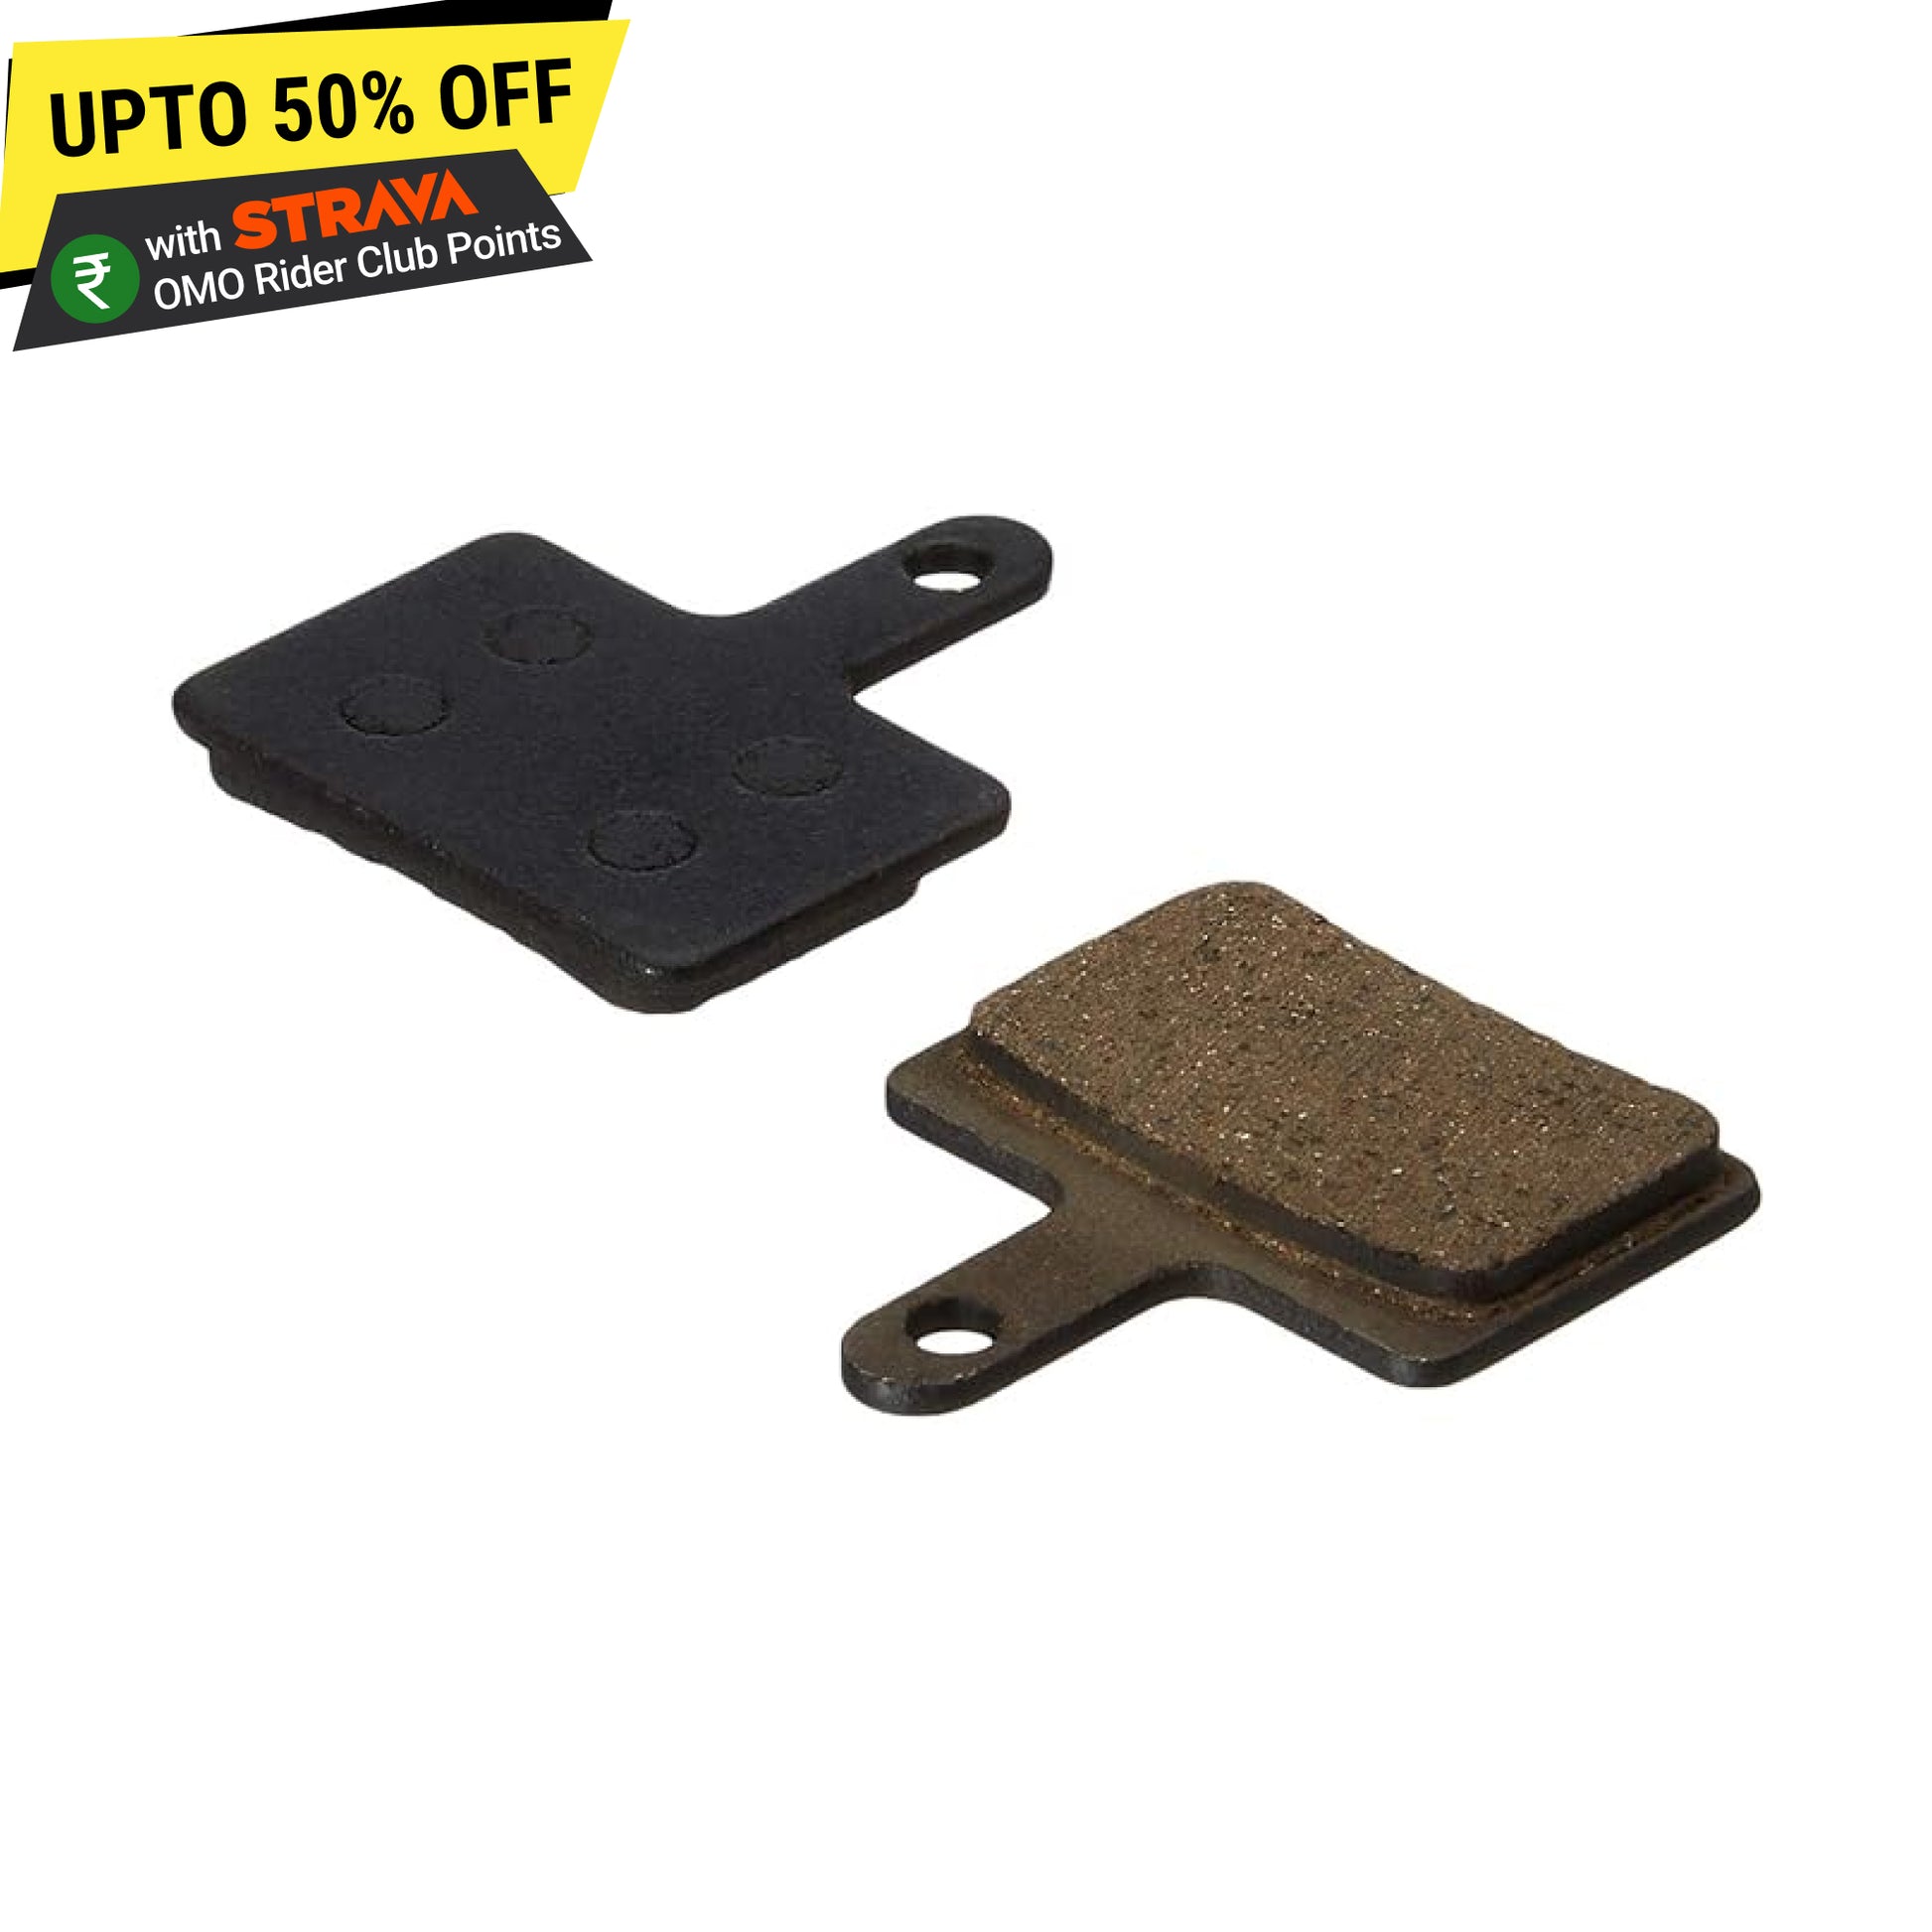 Bicycle disc brake pads spare parts top view by omobikes